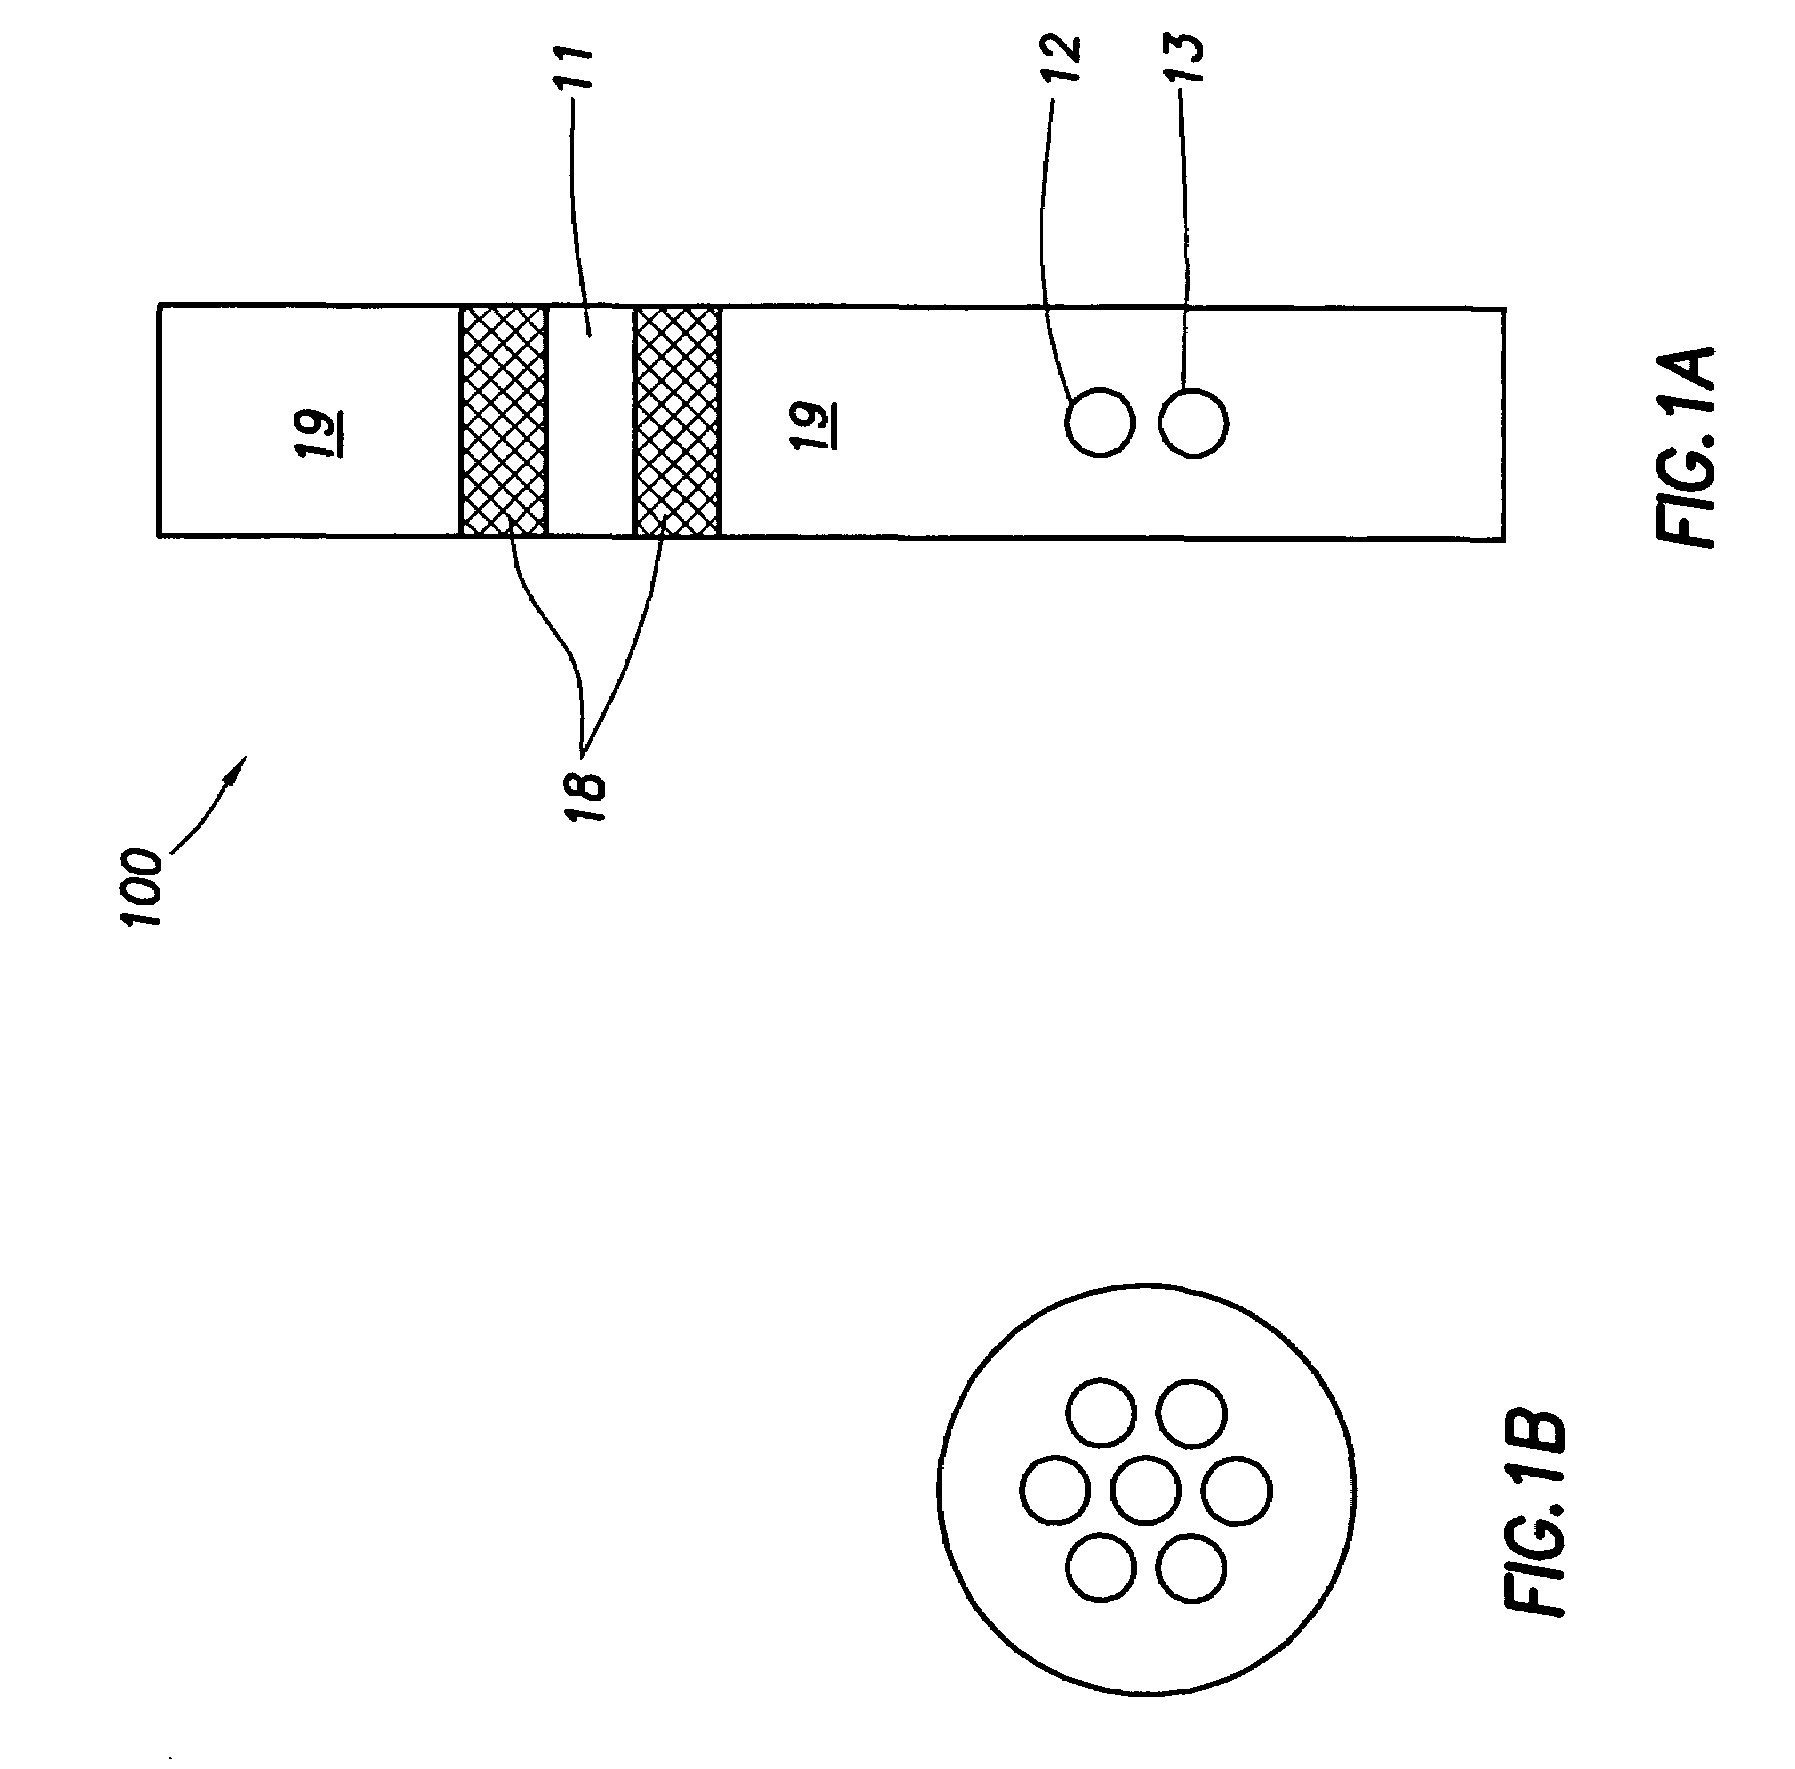 Apparatus and methods for imaging wells drilled with oil-based muds